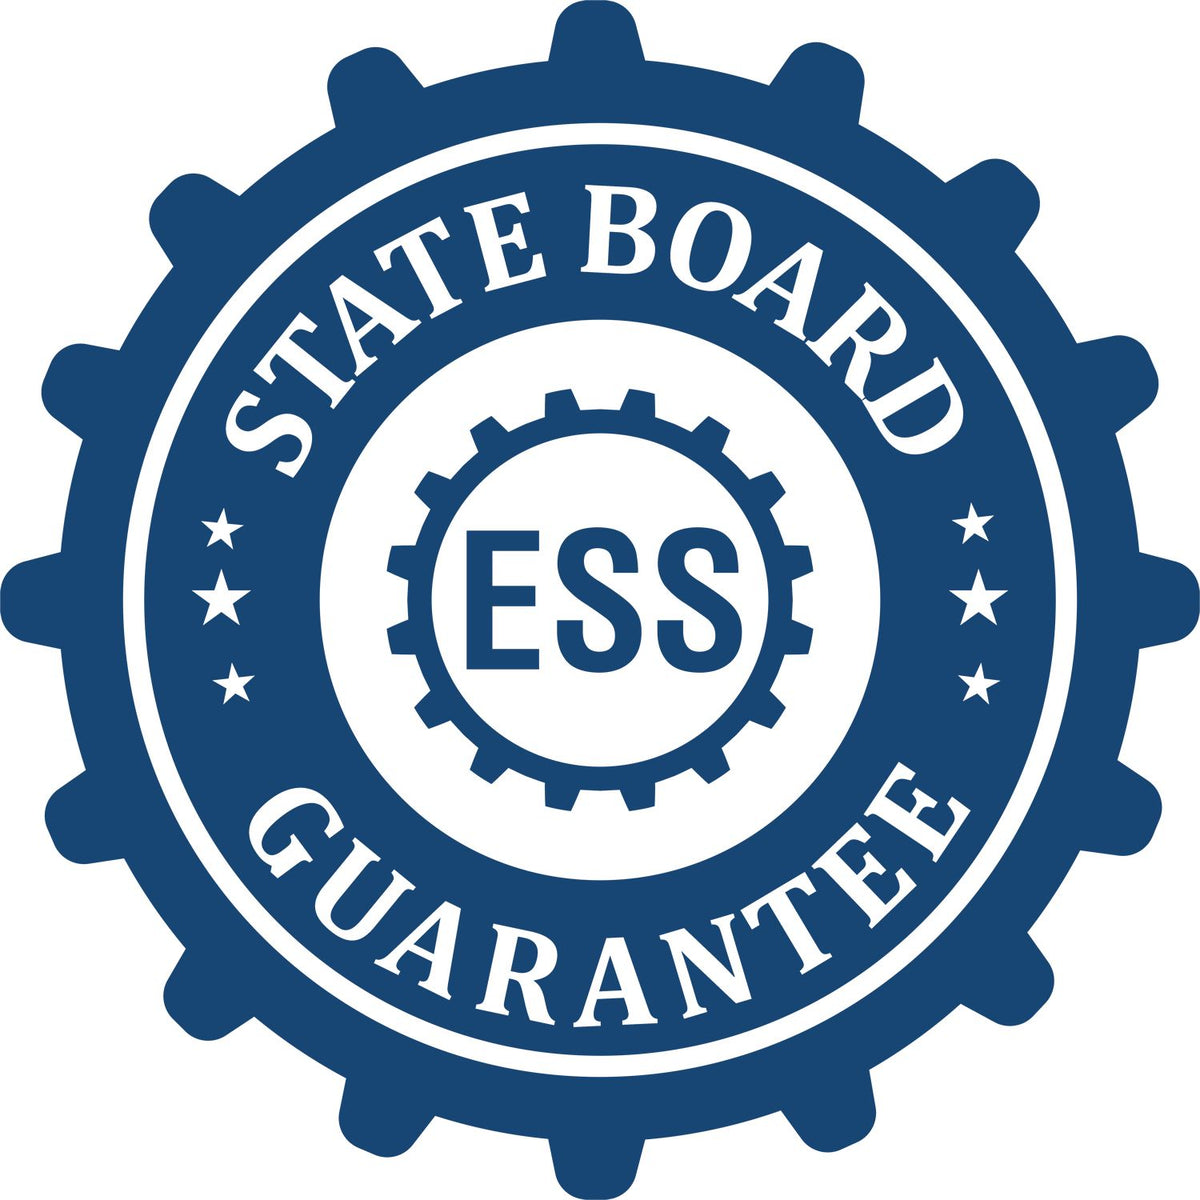 An emblem in a gear shape illustrating a state board guarantee for the Hybrid Maine Engineer Seal